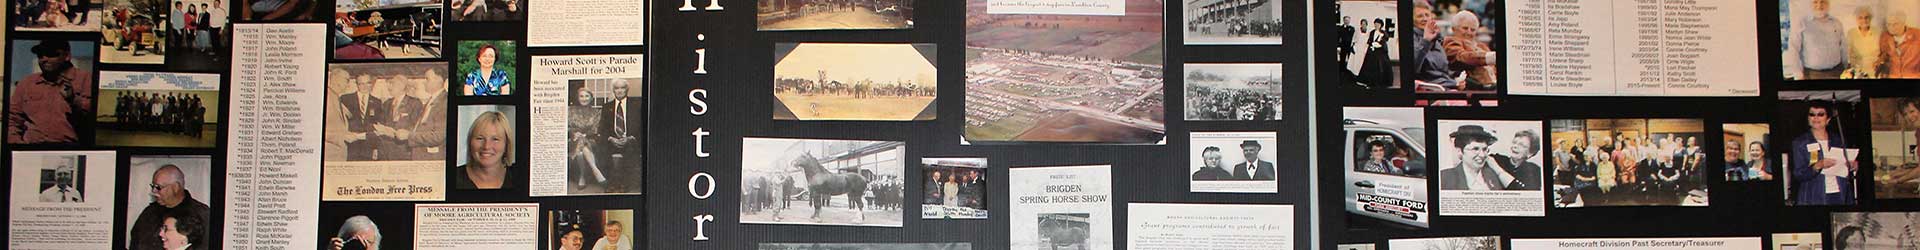 Brigden Fair wins 2013 Fair of the Year from World’s Finest Shows